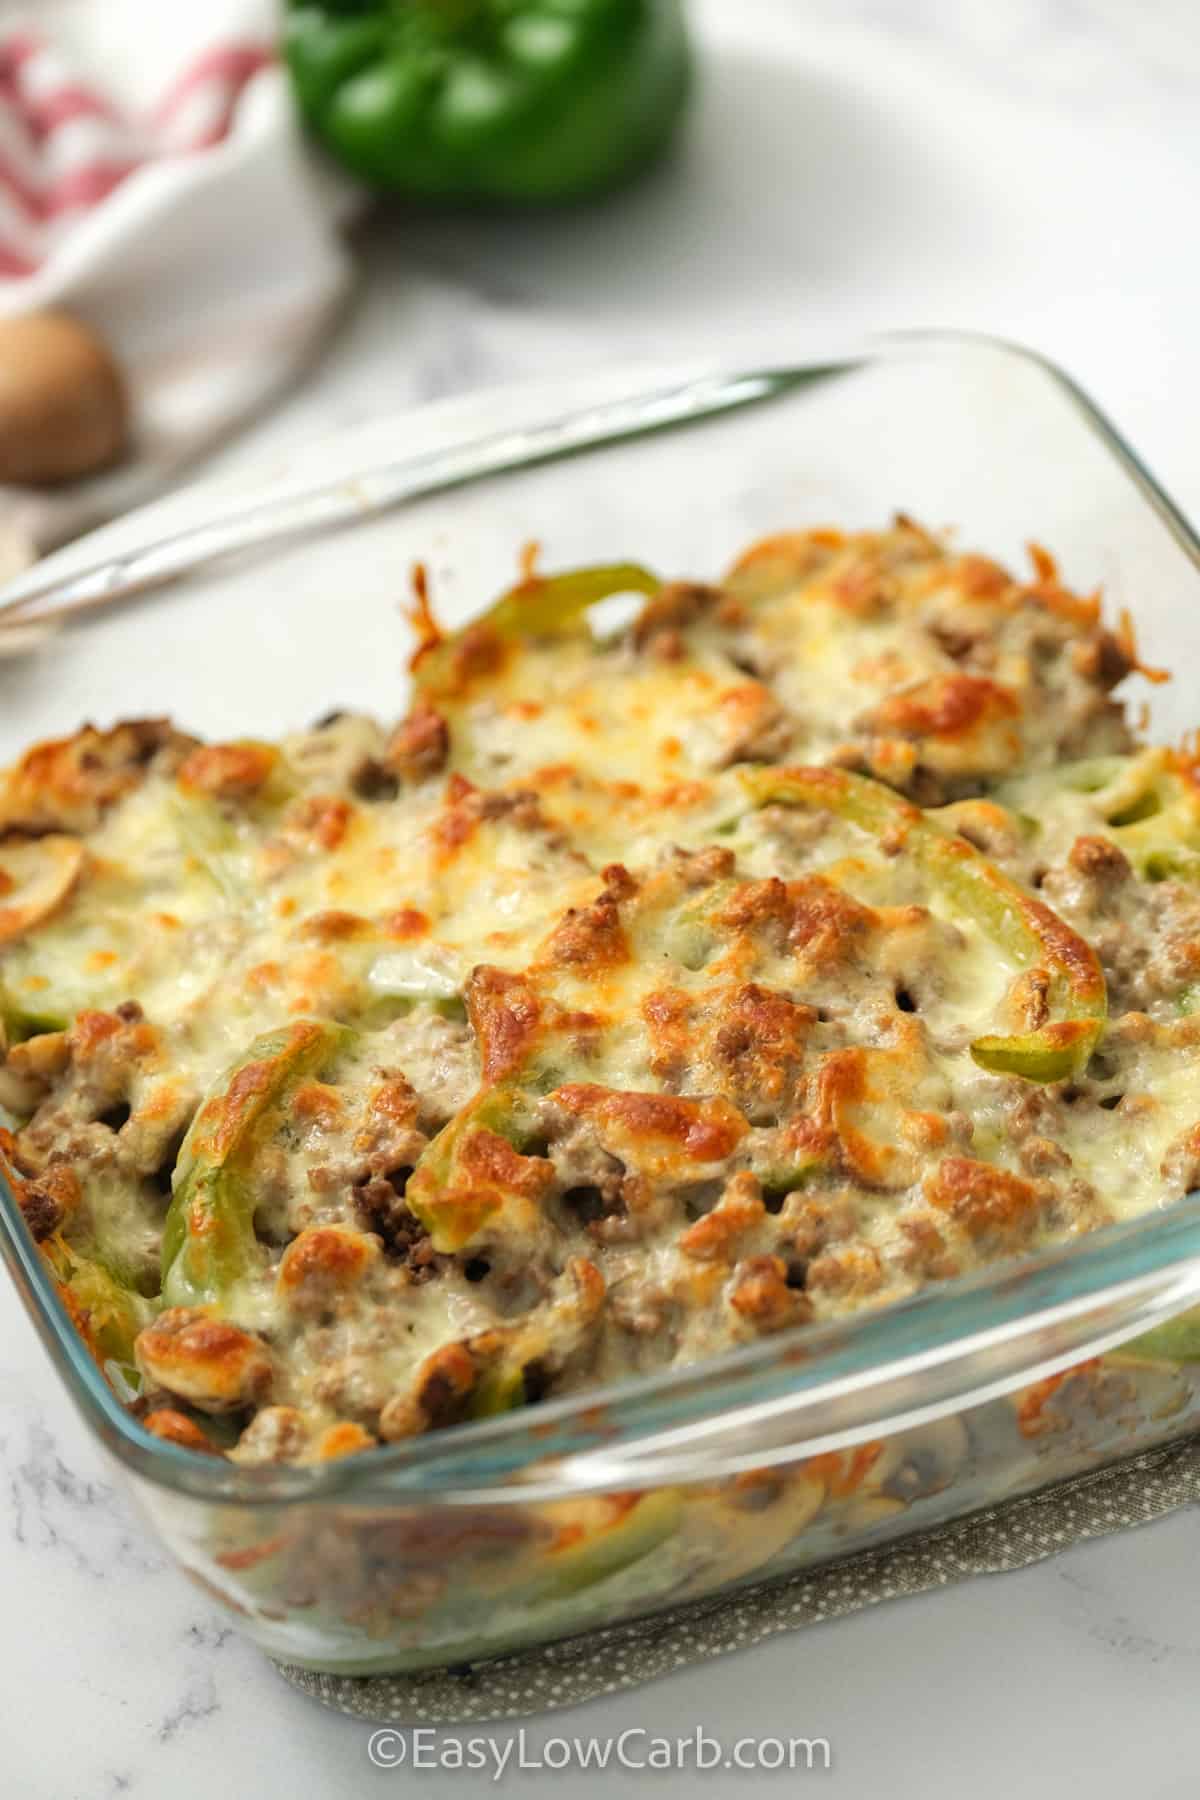 Low Carb Philly Cheesesteak Casserole Recipe after cooking